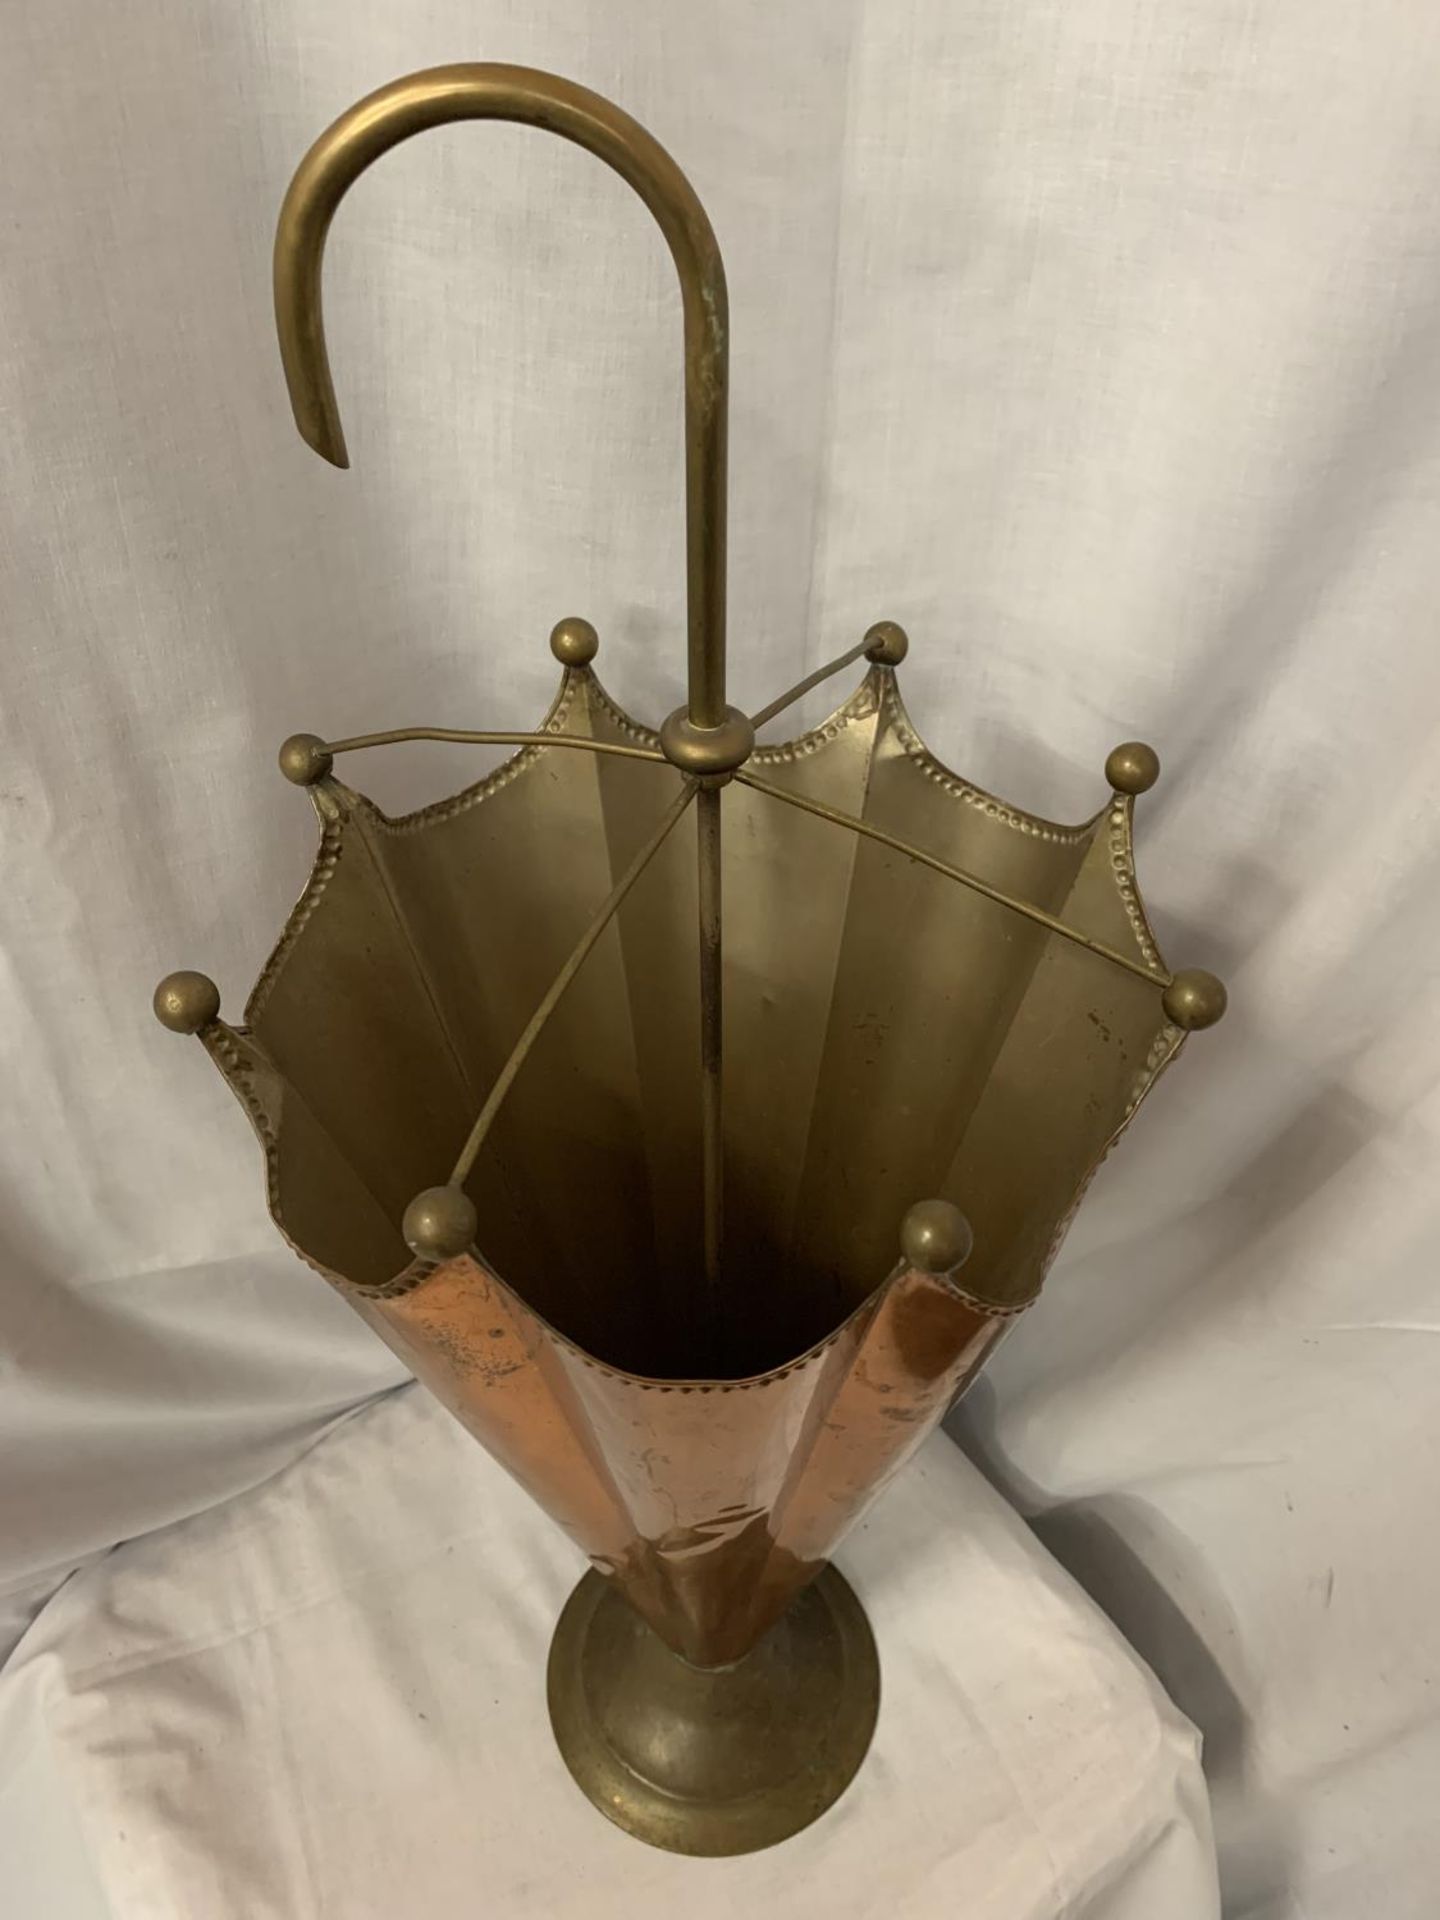 AN UNUSUAL COPPER AND BRASS UMBRELLA STAND IN THE FORM OF AN UMBRELLA - Image 2 of 3